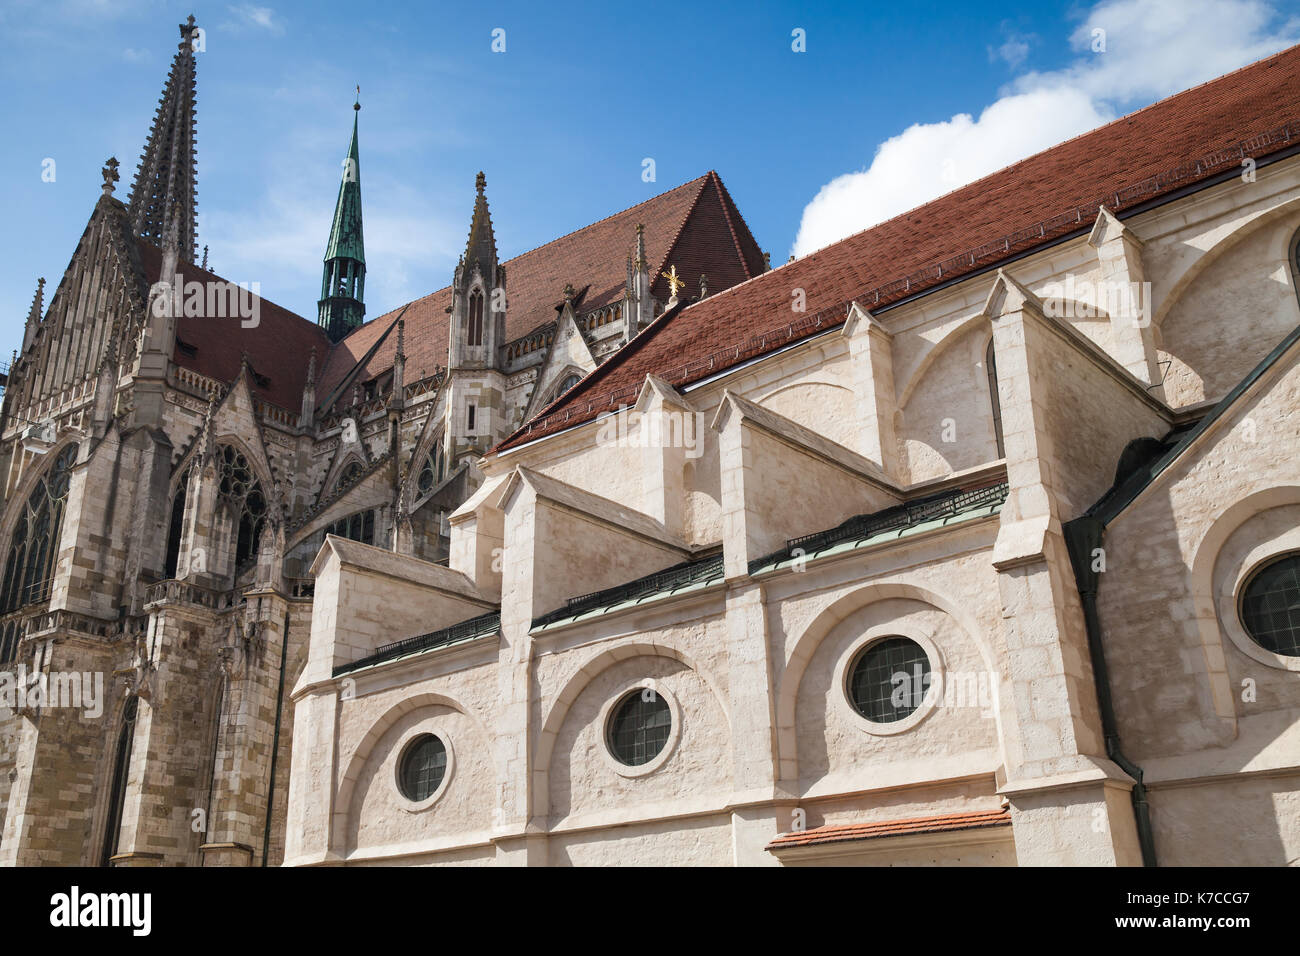 Facade fragment of the Regensburg Cathedral. Germany. It is the most important church and landmark of the city Stock Photo